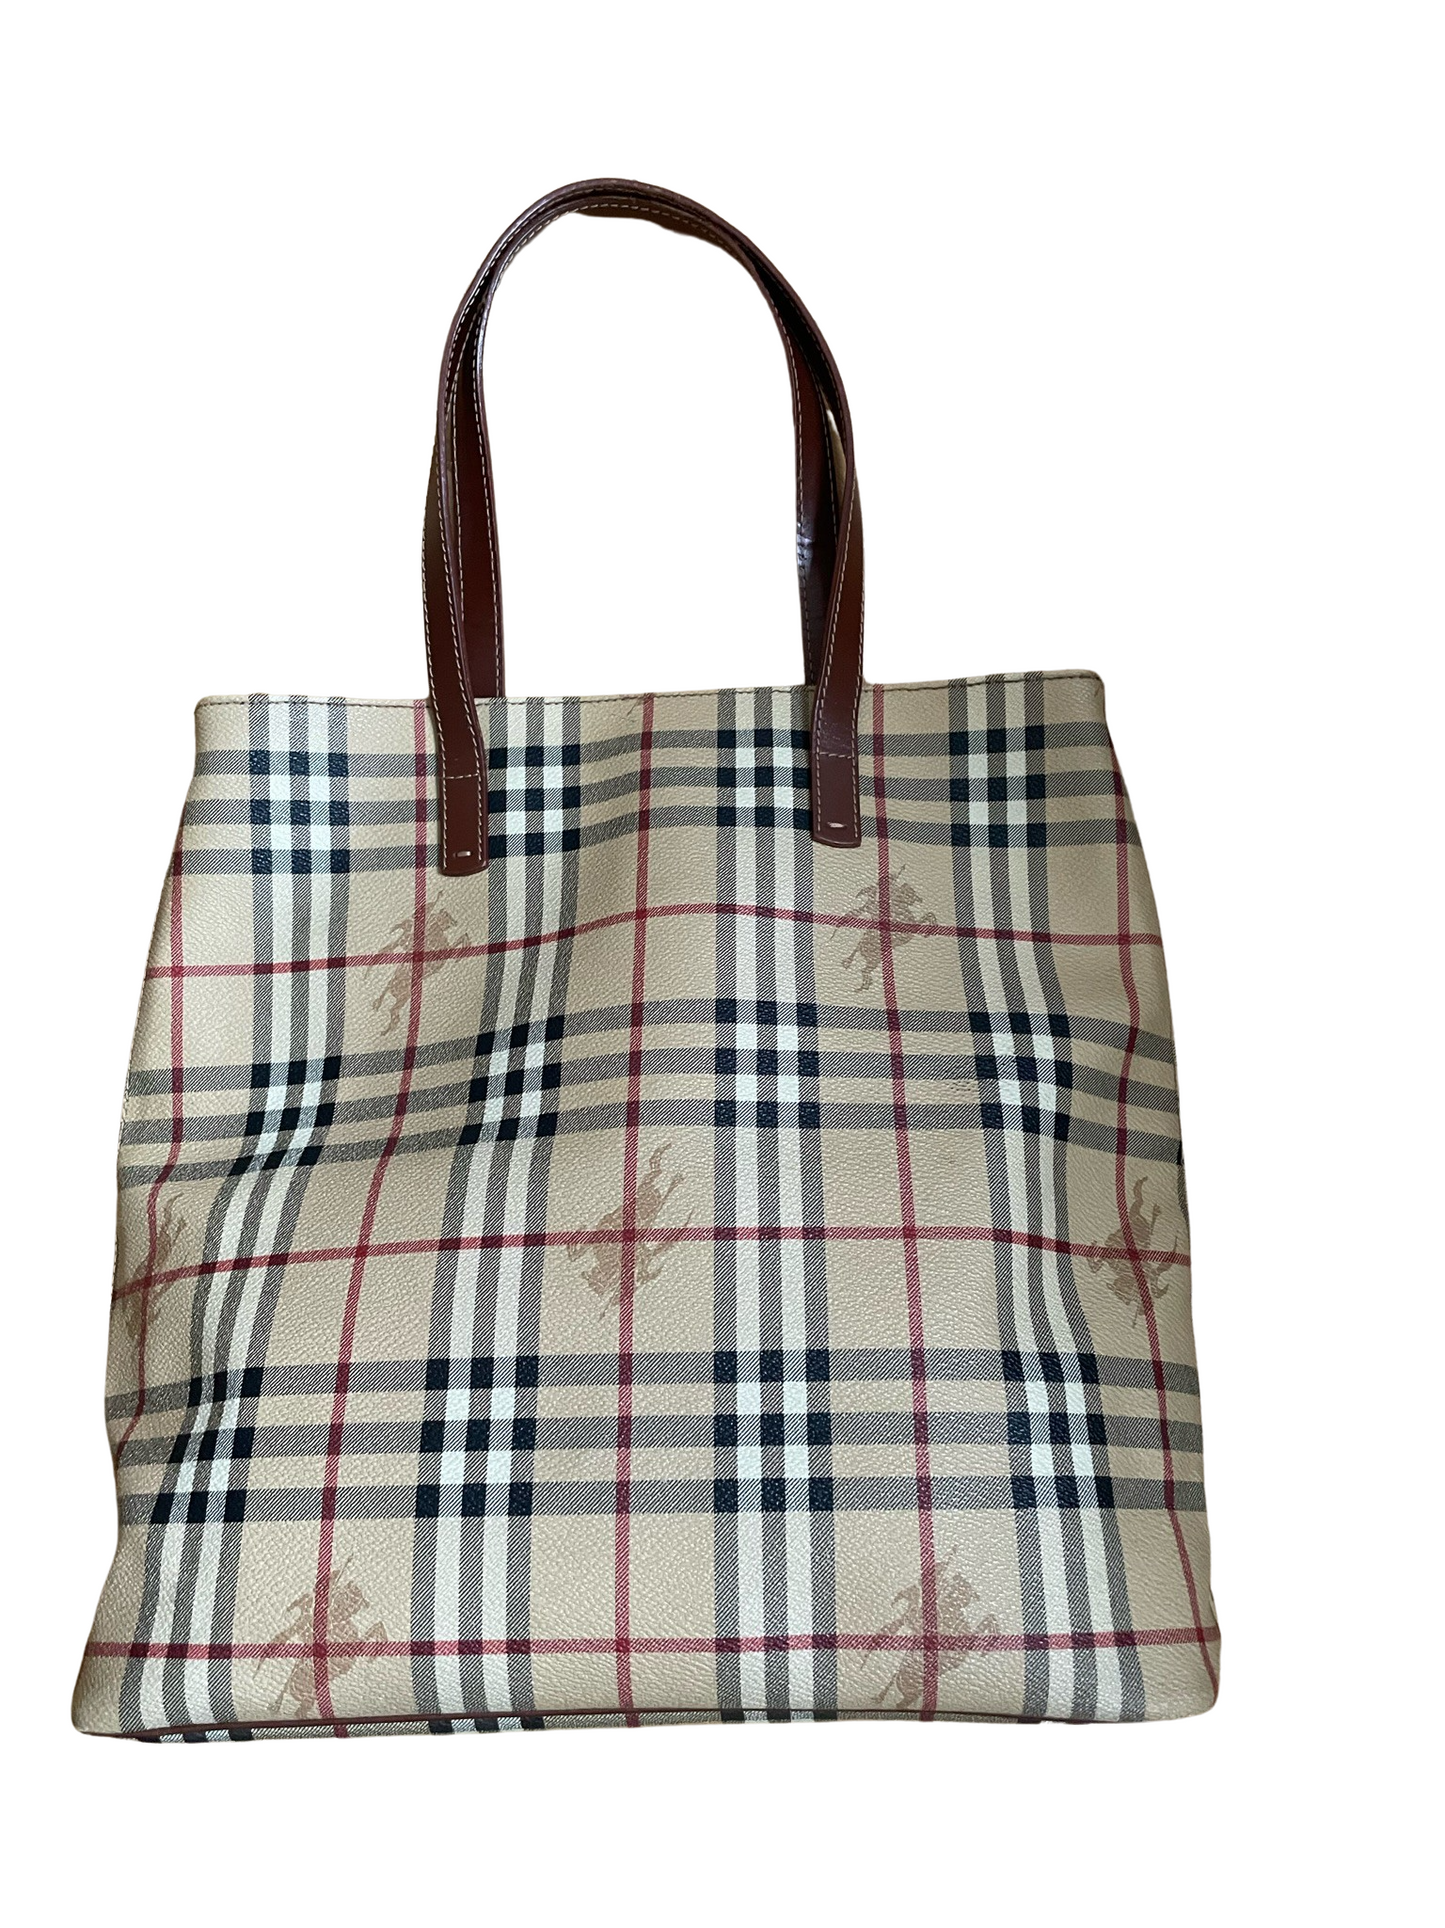 Burberry London Beige Leather Tote Bag